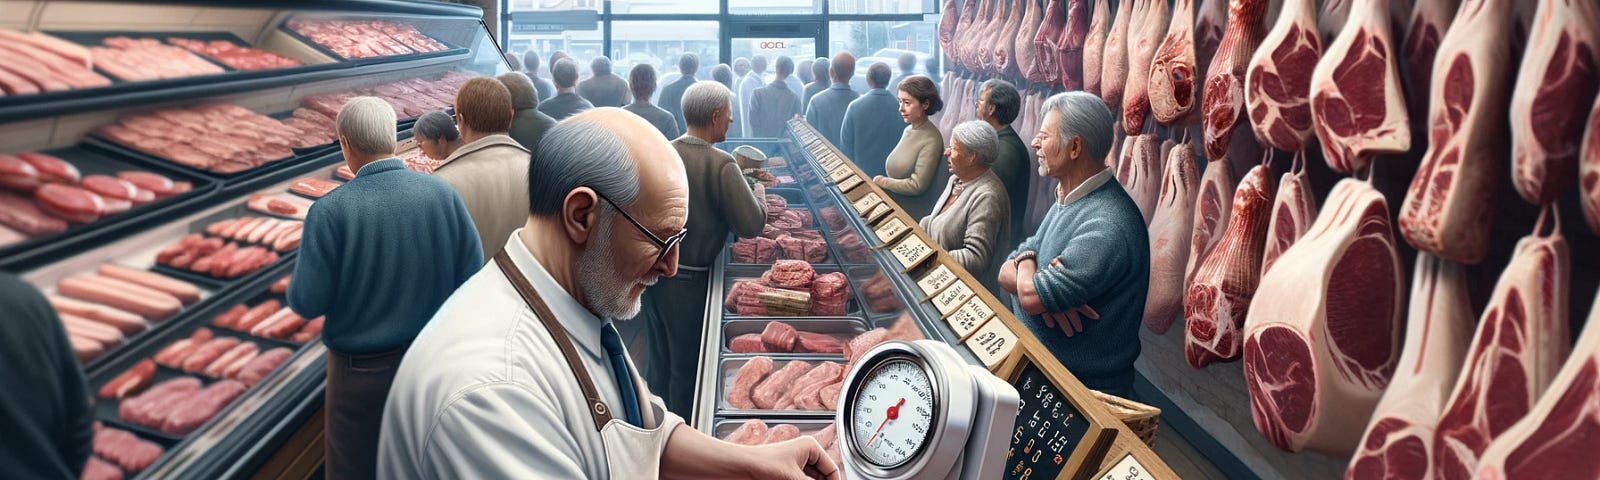 ChatGPT & DALL-E generated panoramic image of a busy butcher shop on a Saturday morning, capturing the moment where the butcher subtly places his thumb on the scale while weighing a cut of meat.